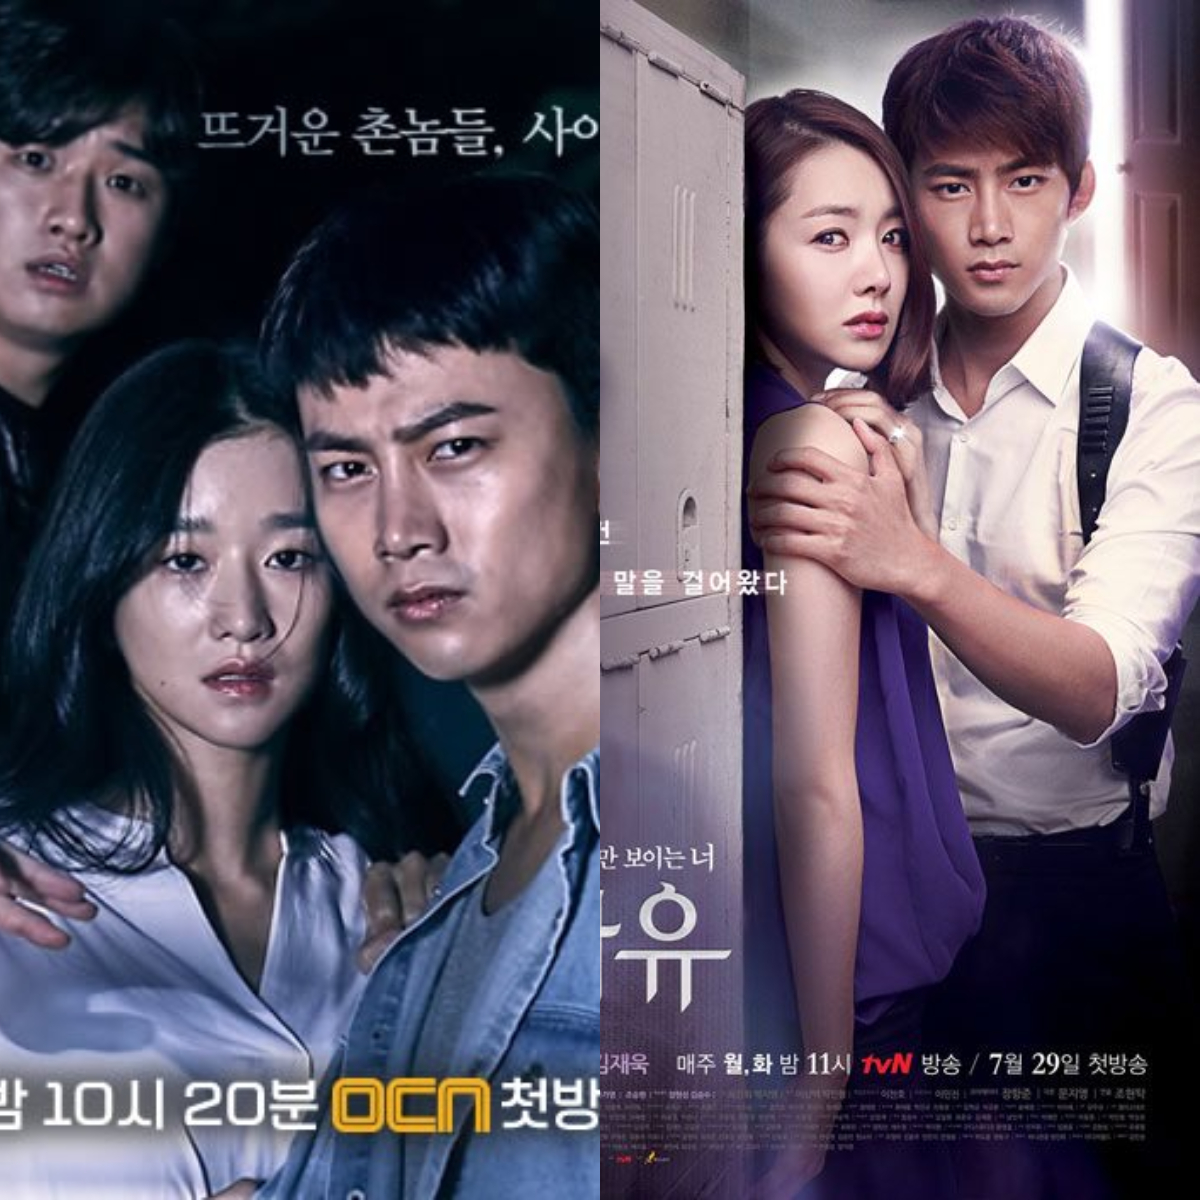 Vincenzo star Ok Taecyeon in Save Me and Who Are You 2013 as must-watch KDramas